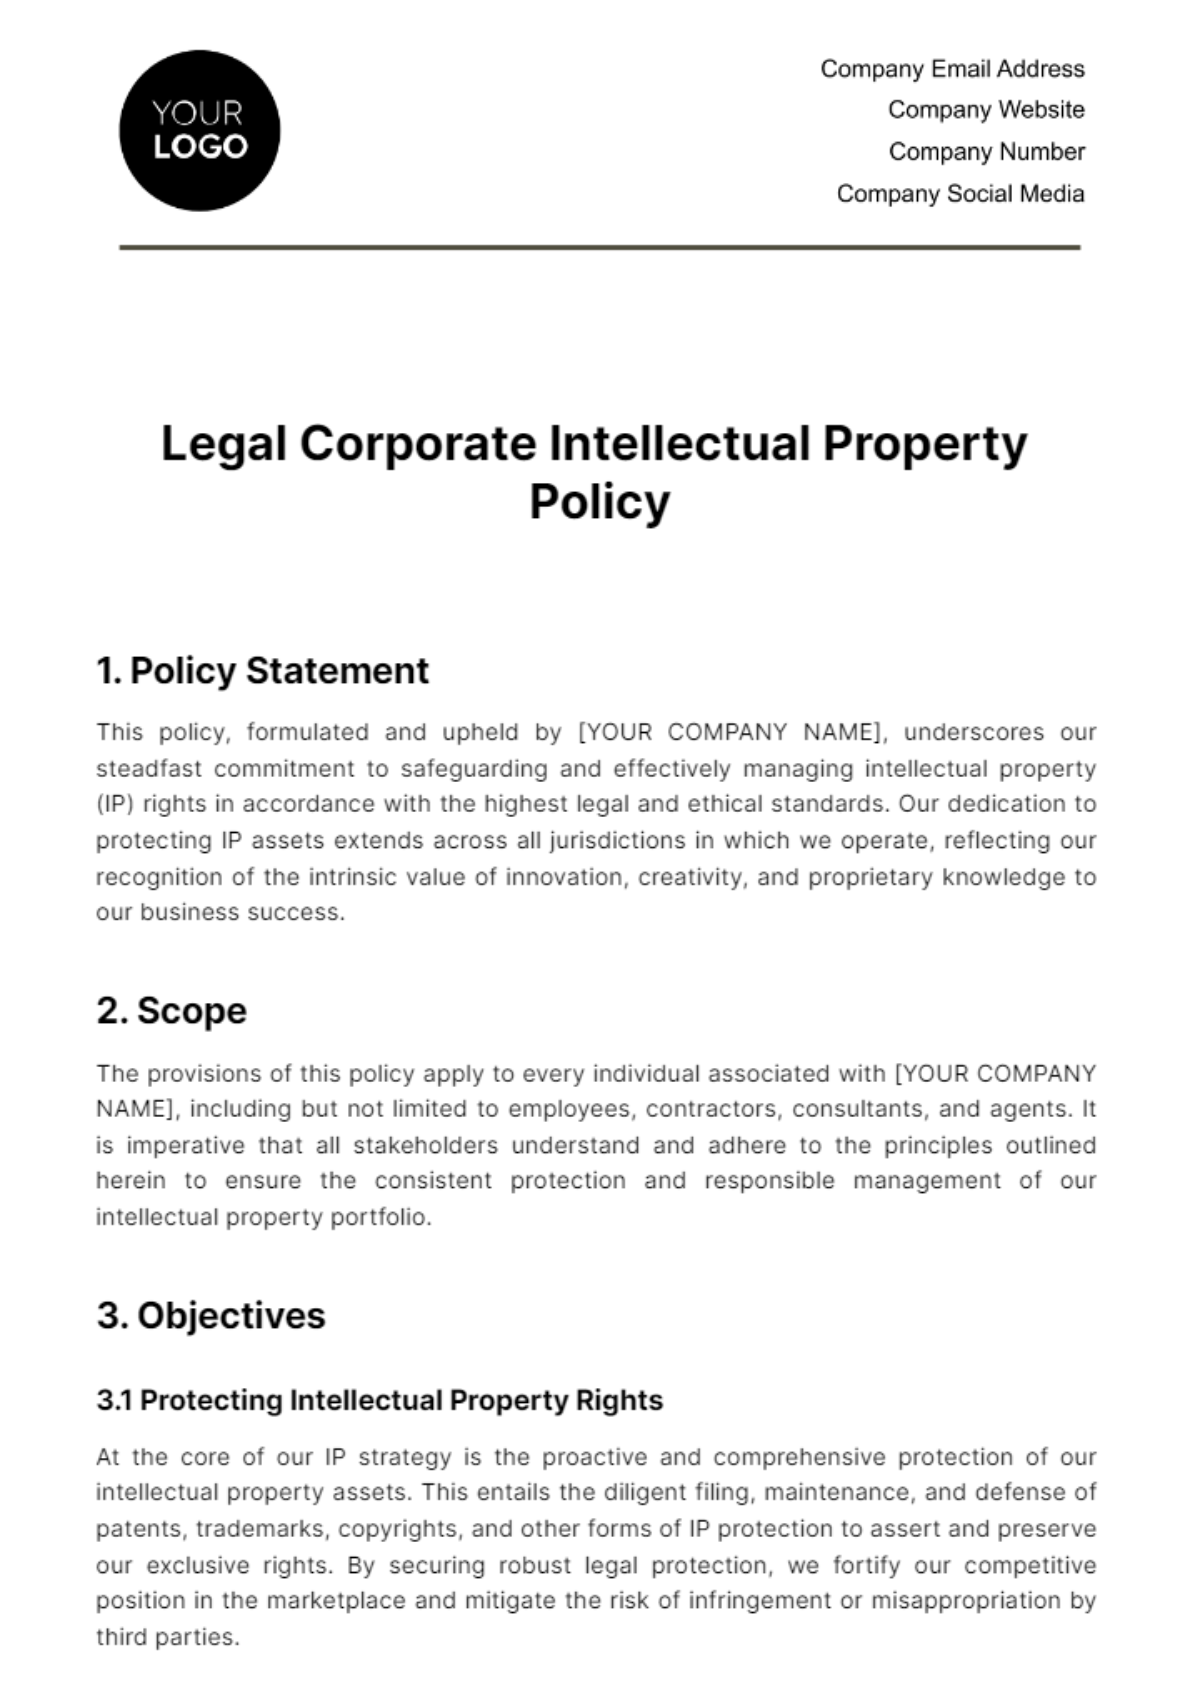 Legal Corporate Intellectual Property Policy Template